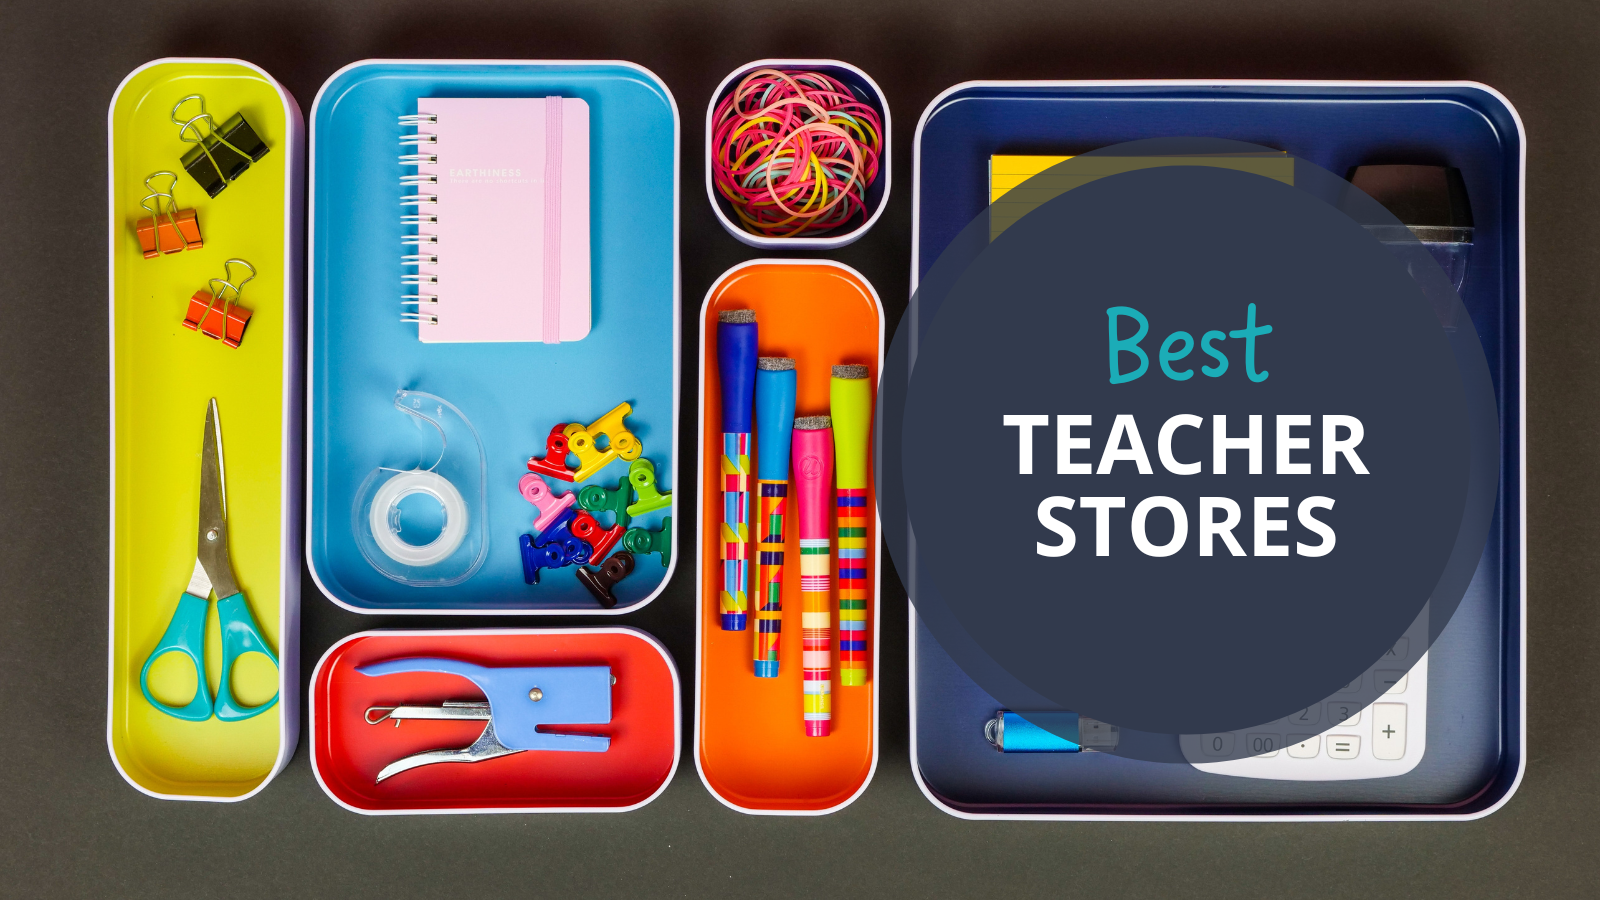 5 Best Teacher Supplies for Middle and High School - Lindsay Bowden